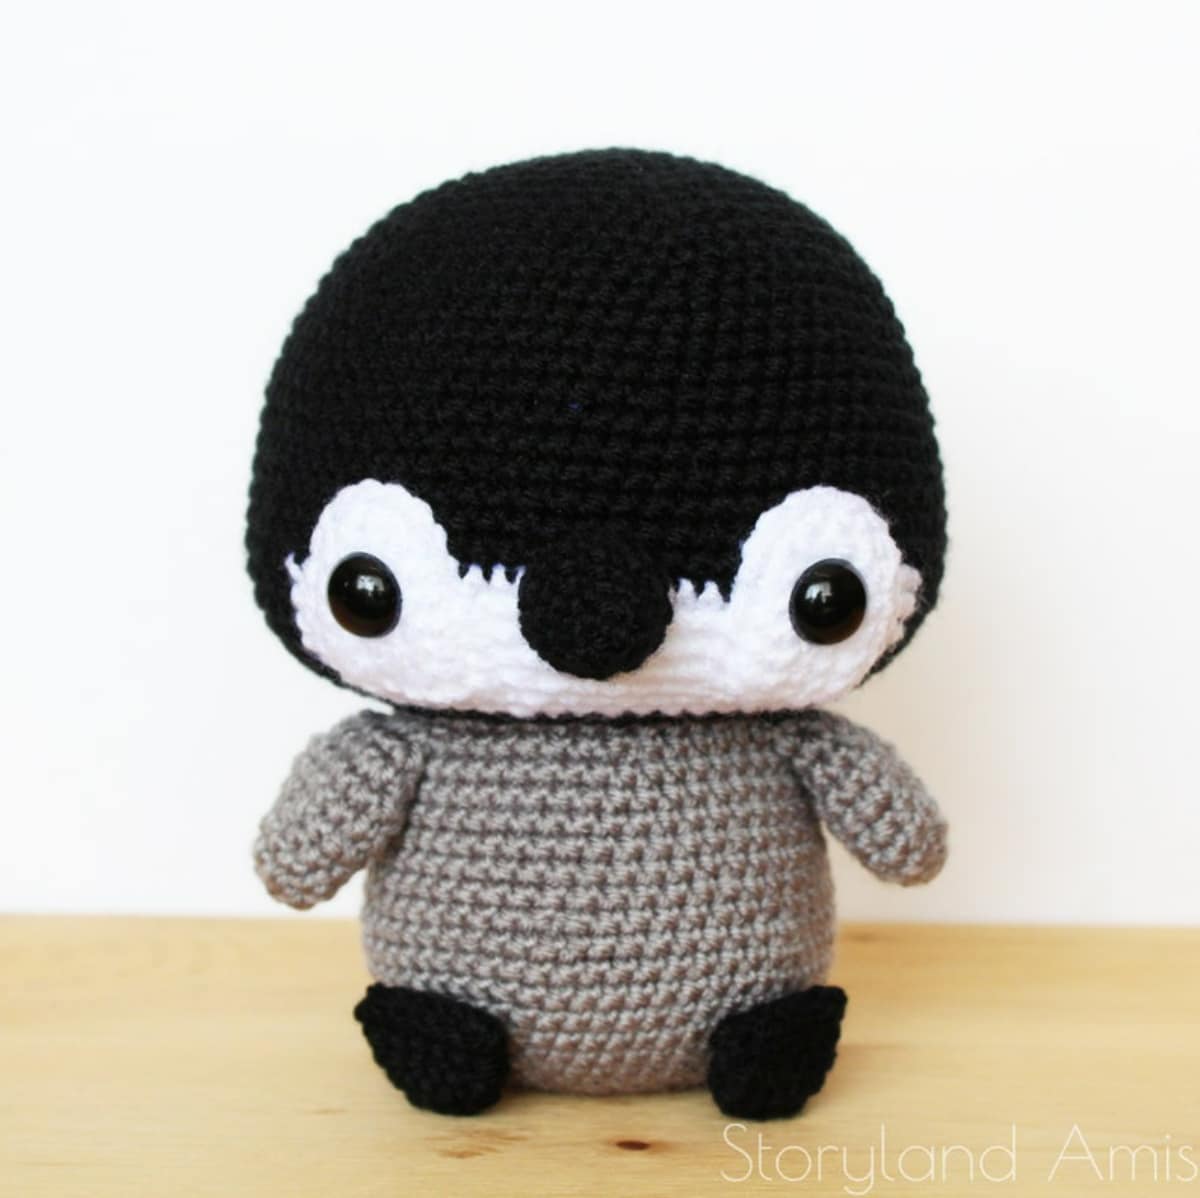 Large crochet penguin with an oversized black and white face with a black bobble for a nose and a gray body.